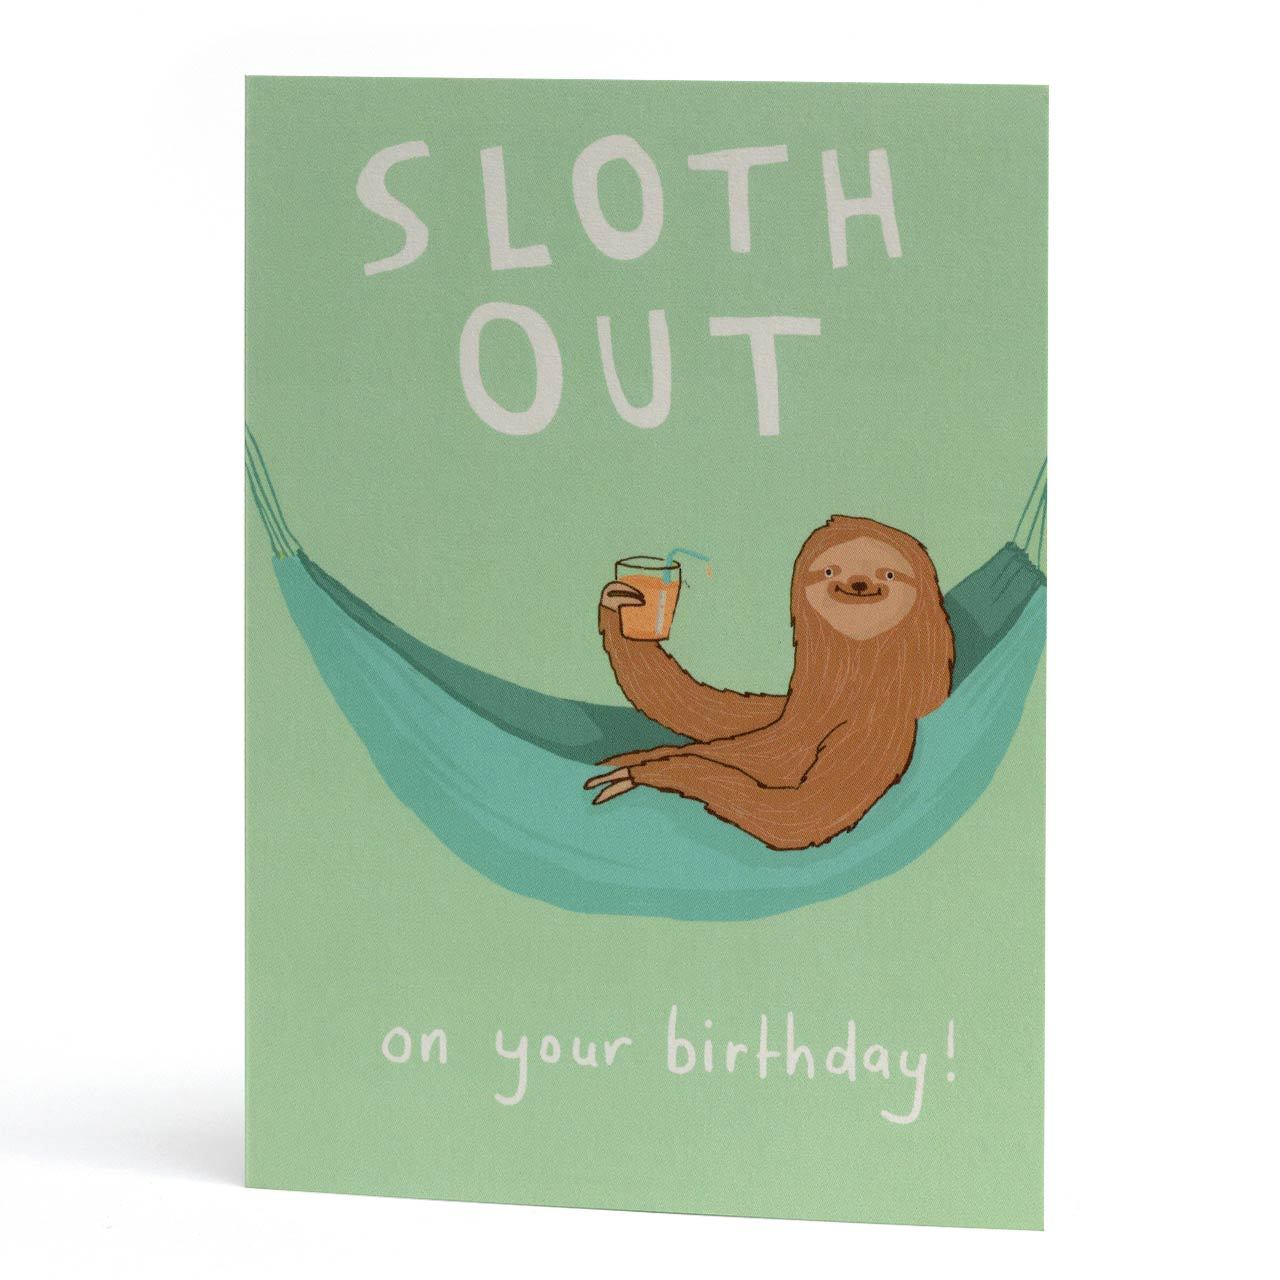 Sloth Out Birthday Greeting Card